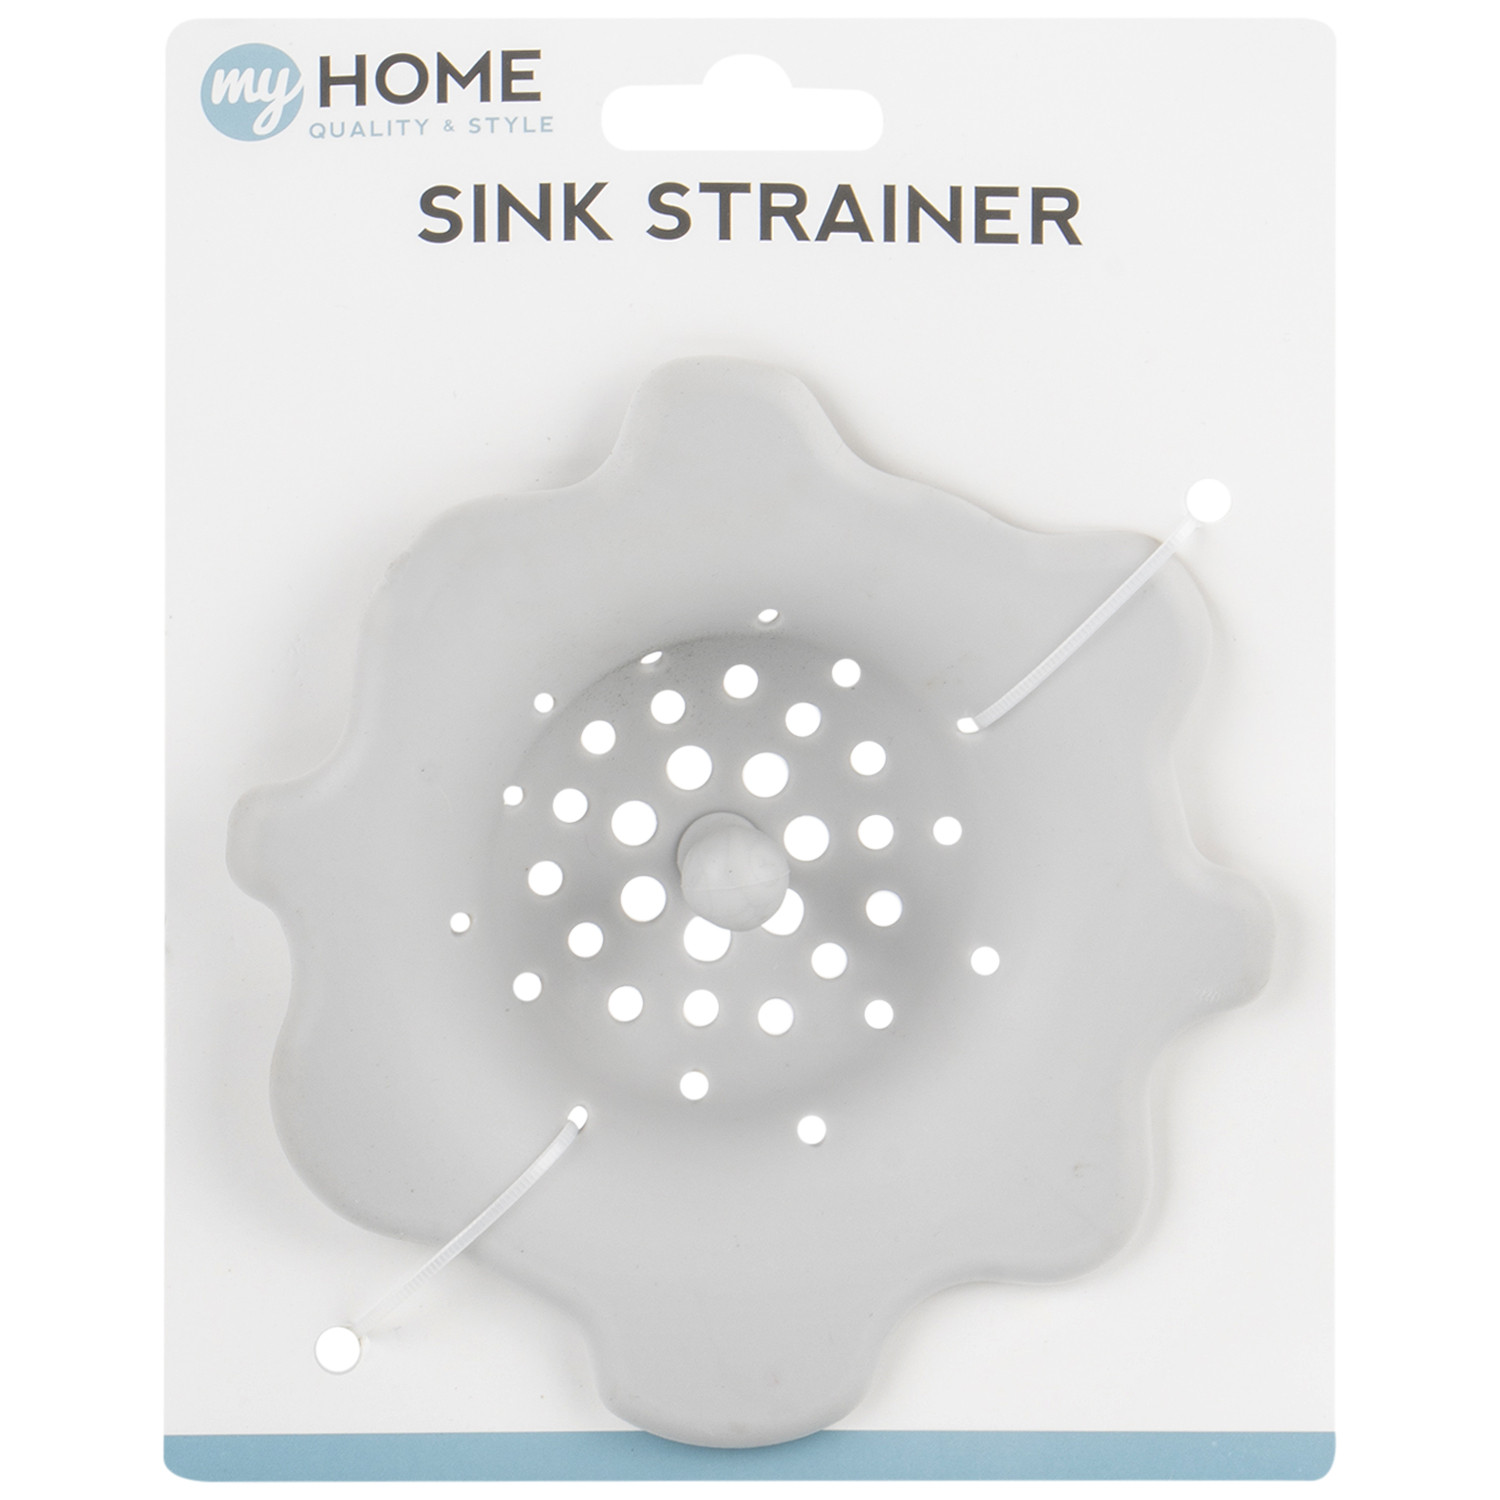 My Home Sink Strainer Image